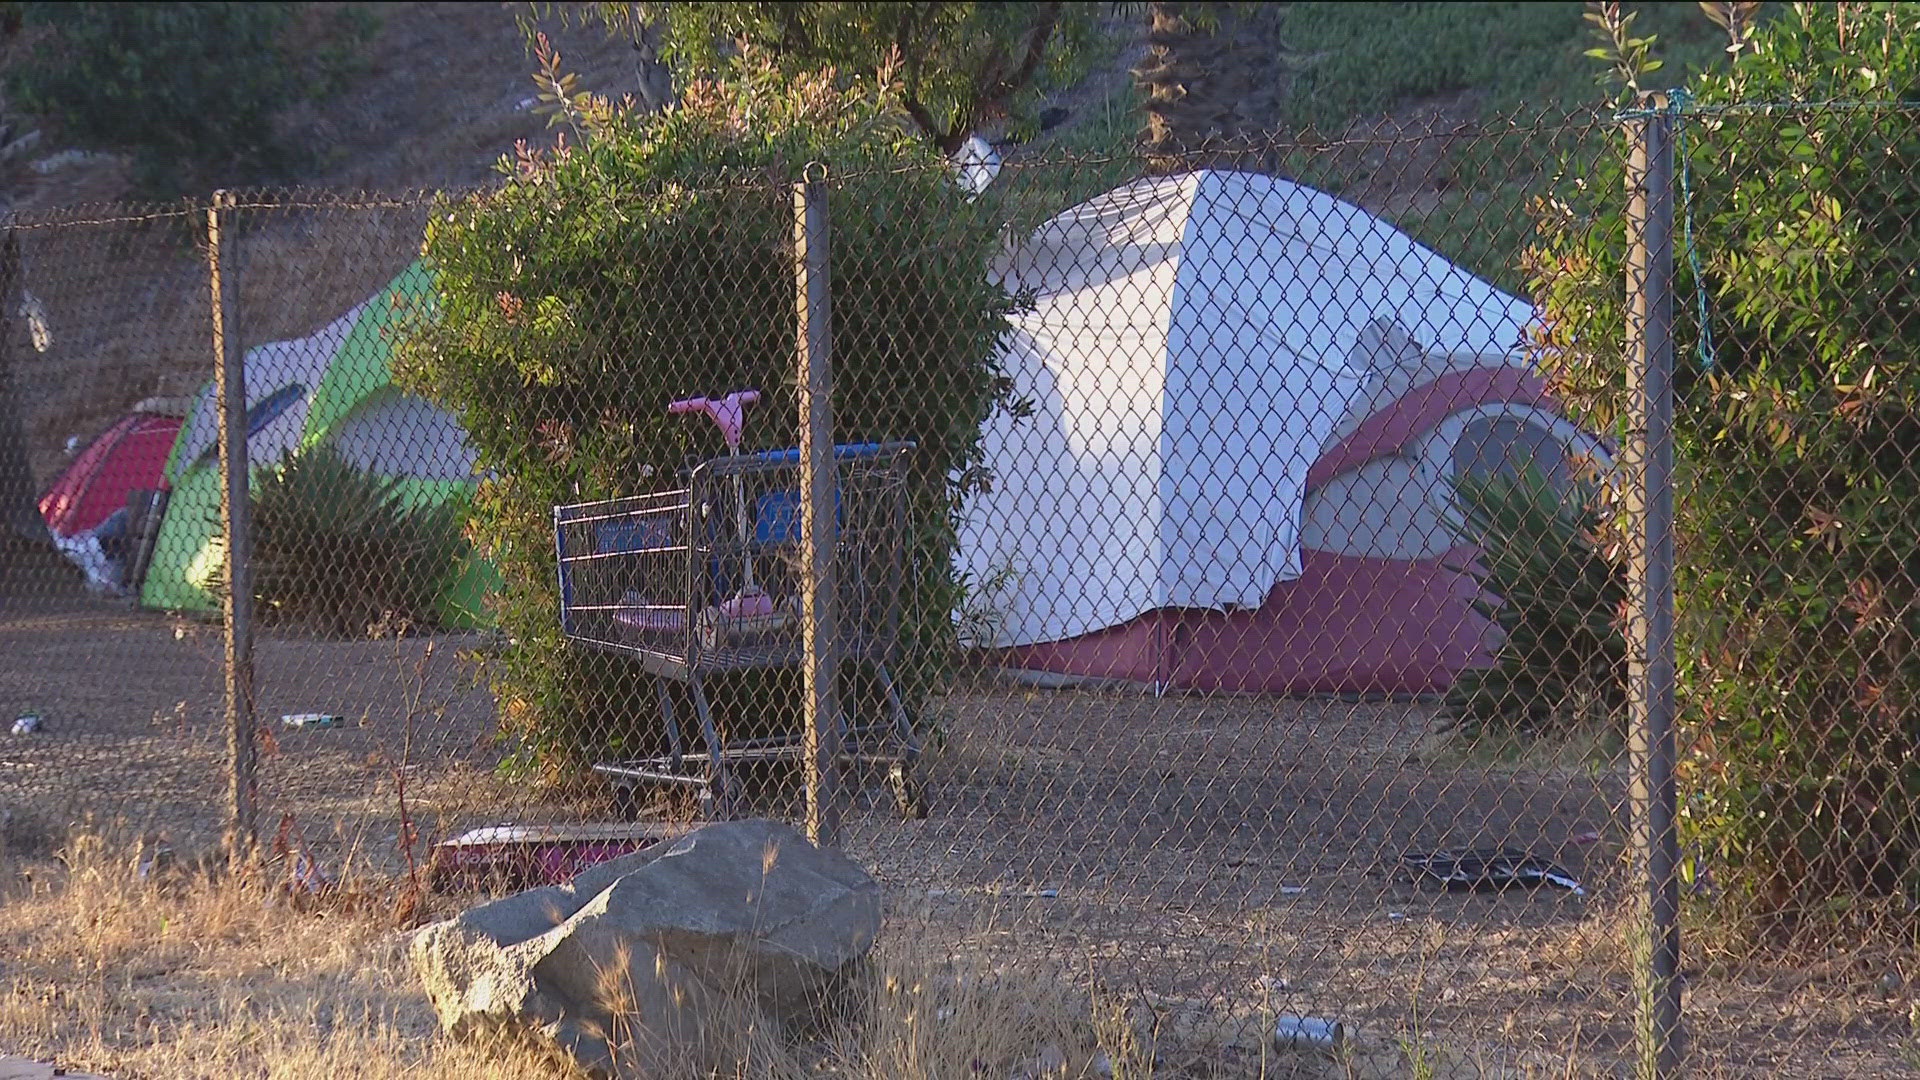 A homeless encampment along the freeway exit in Barrio Logan is one of the concerns brought up during Wednesday’s Community Planning Group meeting.